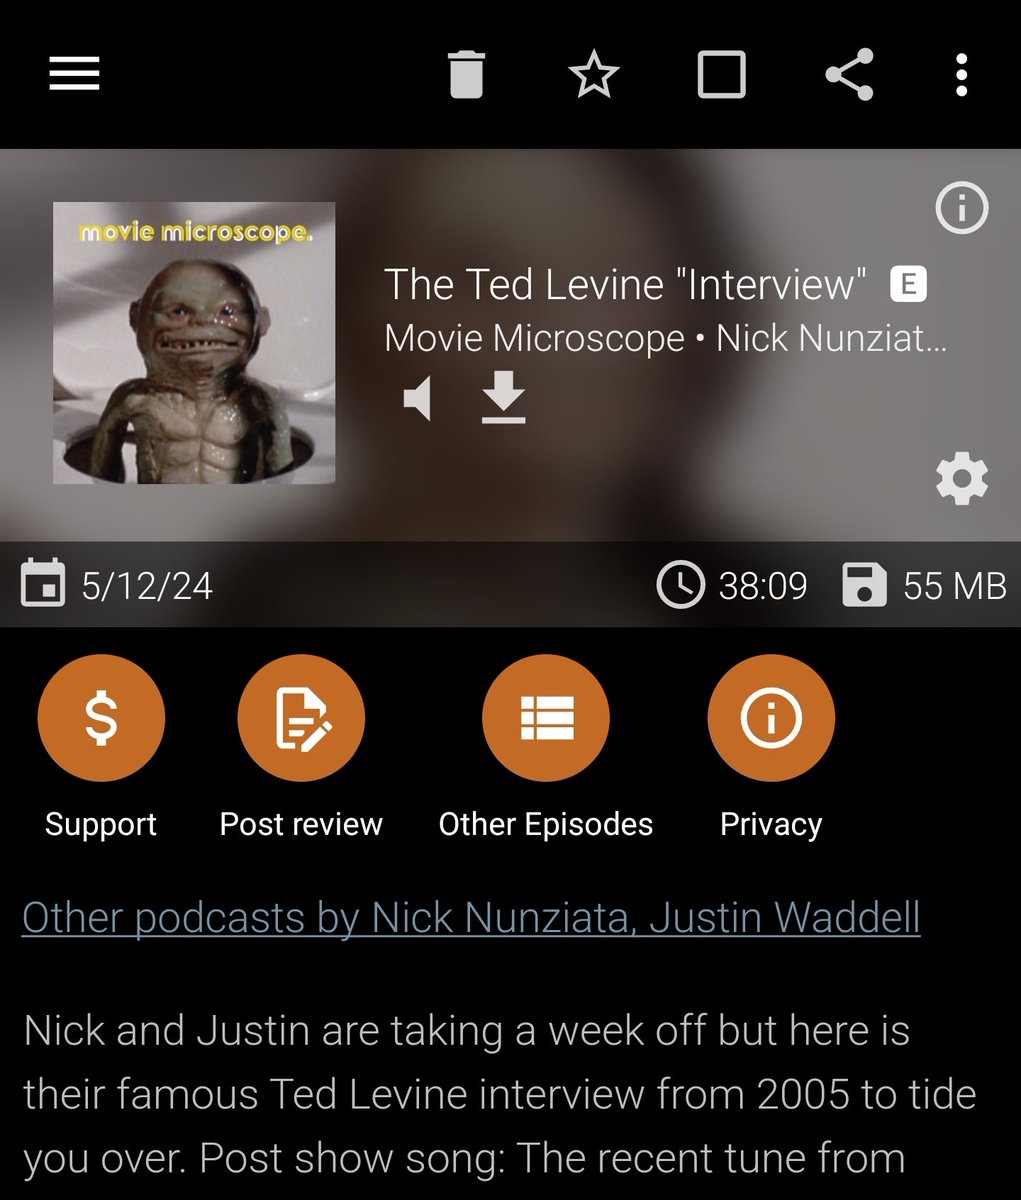 The first time I heard this I laughed so hard it genuinely almost killed me (I was driving cross-country in blizzard conditions). Comedy should be dangerous, baby!

@buildy @nicknunziata